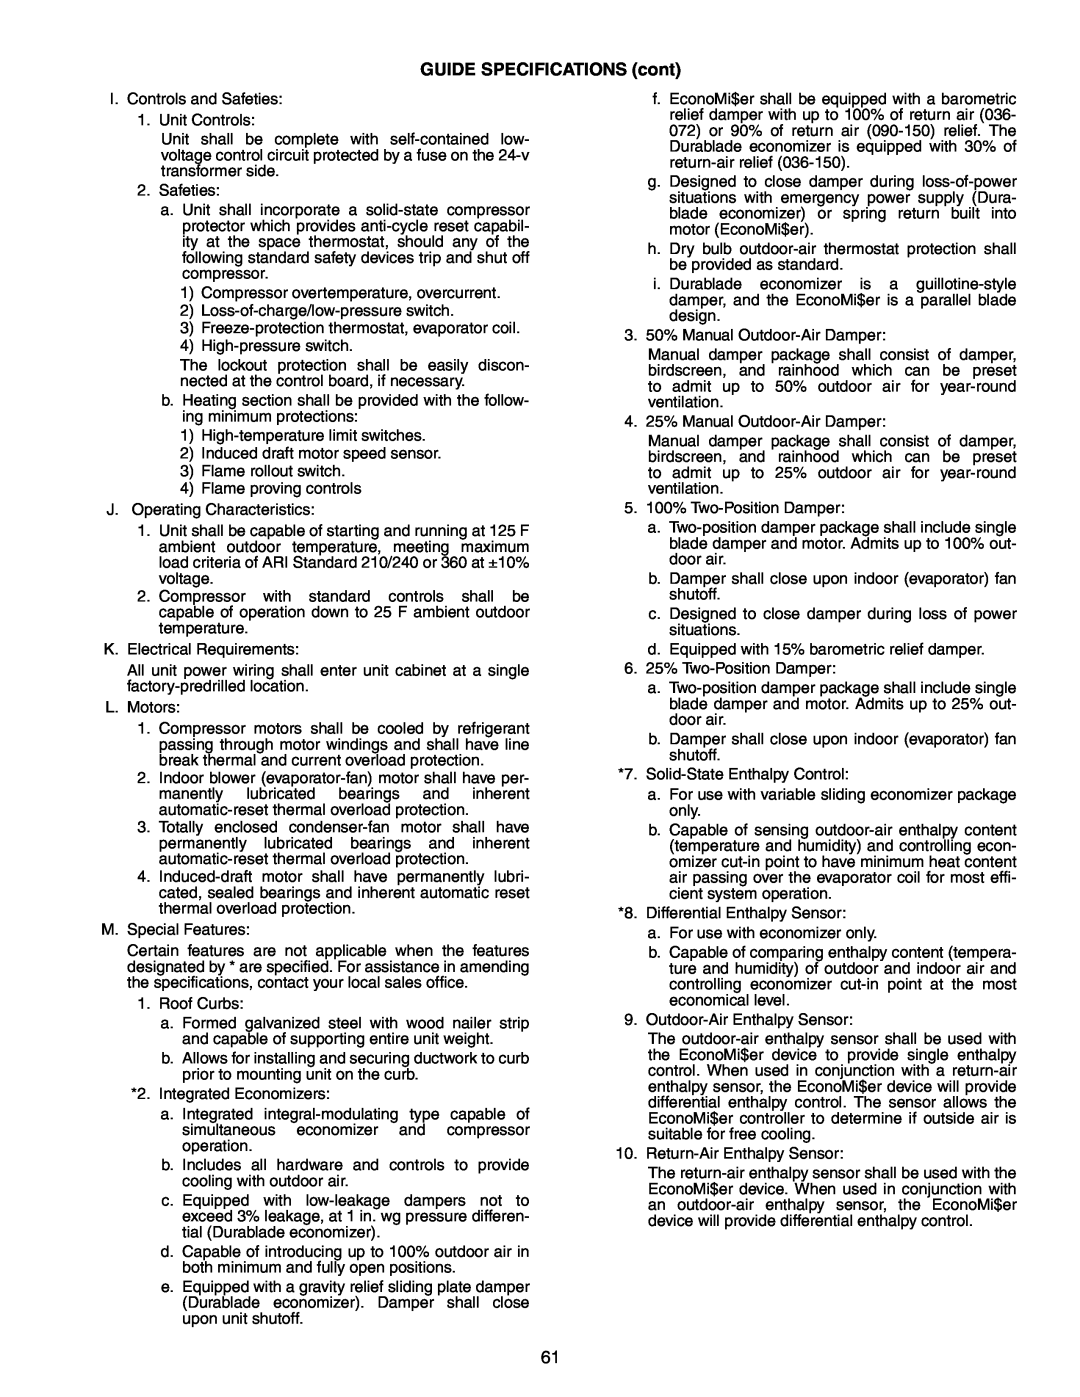 Bryant 581B manual GUIDE SPECIFICATIONS cont 